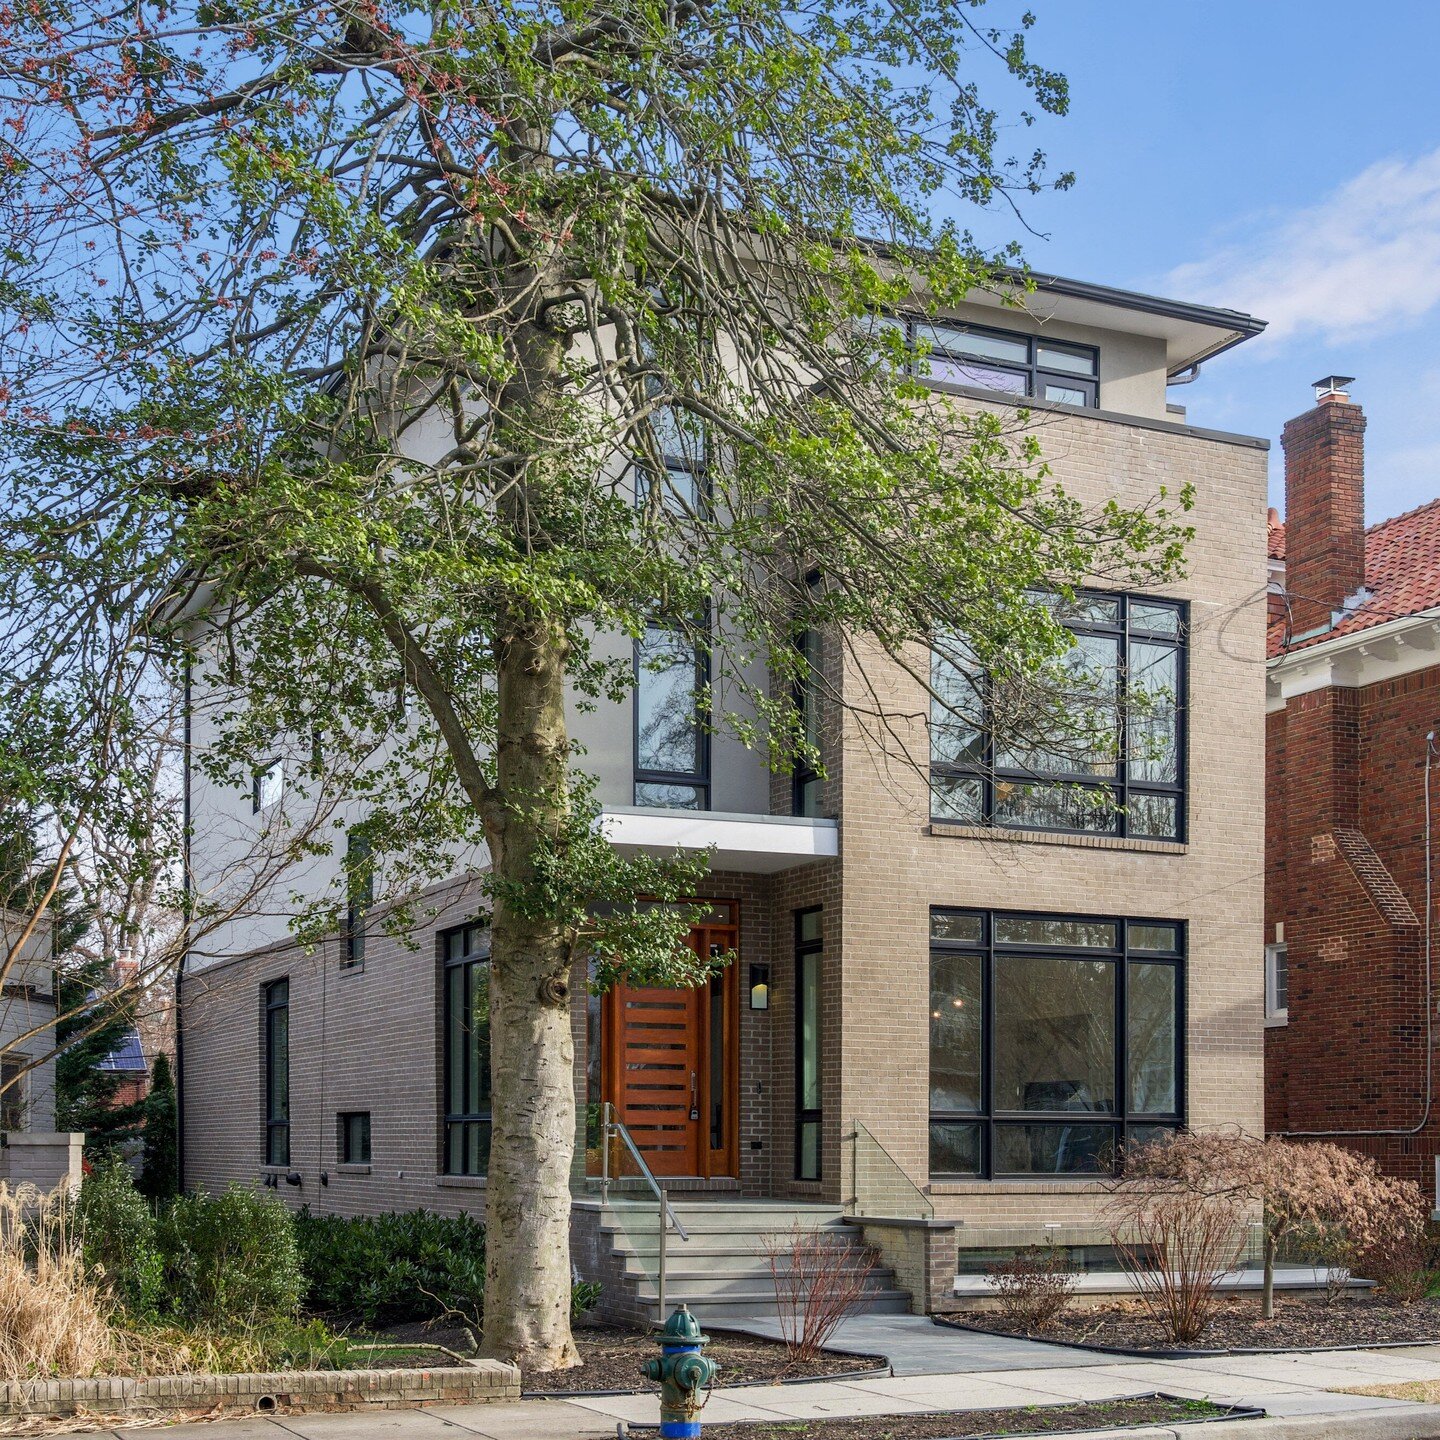 #ComingSoon 
1617 Madison St. NW Washington, DC 20011
.
https://homevisit.view.property/2106895?a=1
.
Introducing 1617 Madison St. NW, a stunning contemporary custom built home (2011) located on a quiet street with views of Rock Creek Park. This impe